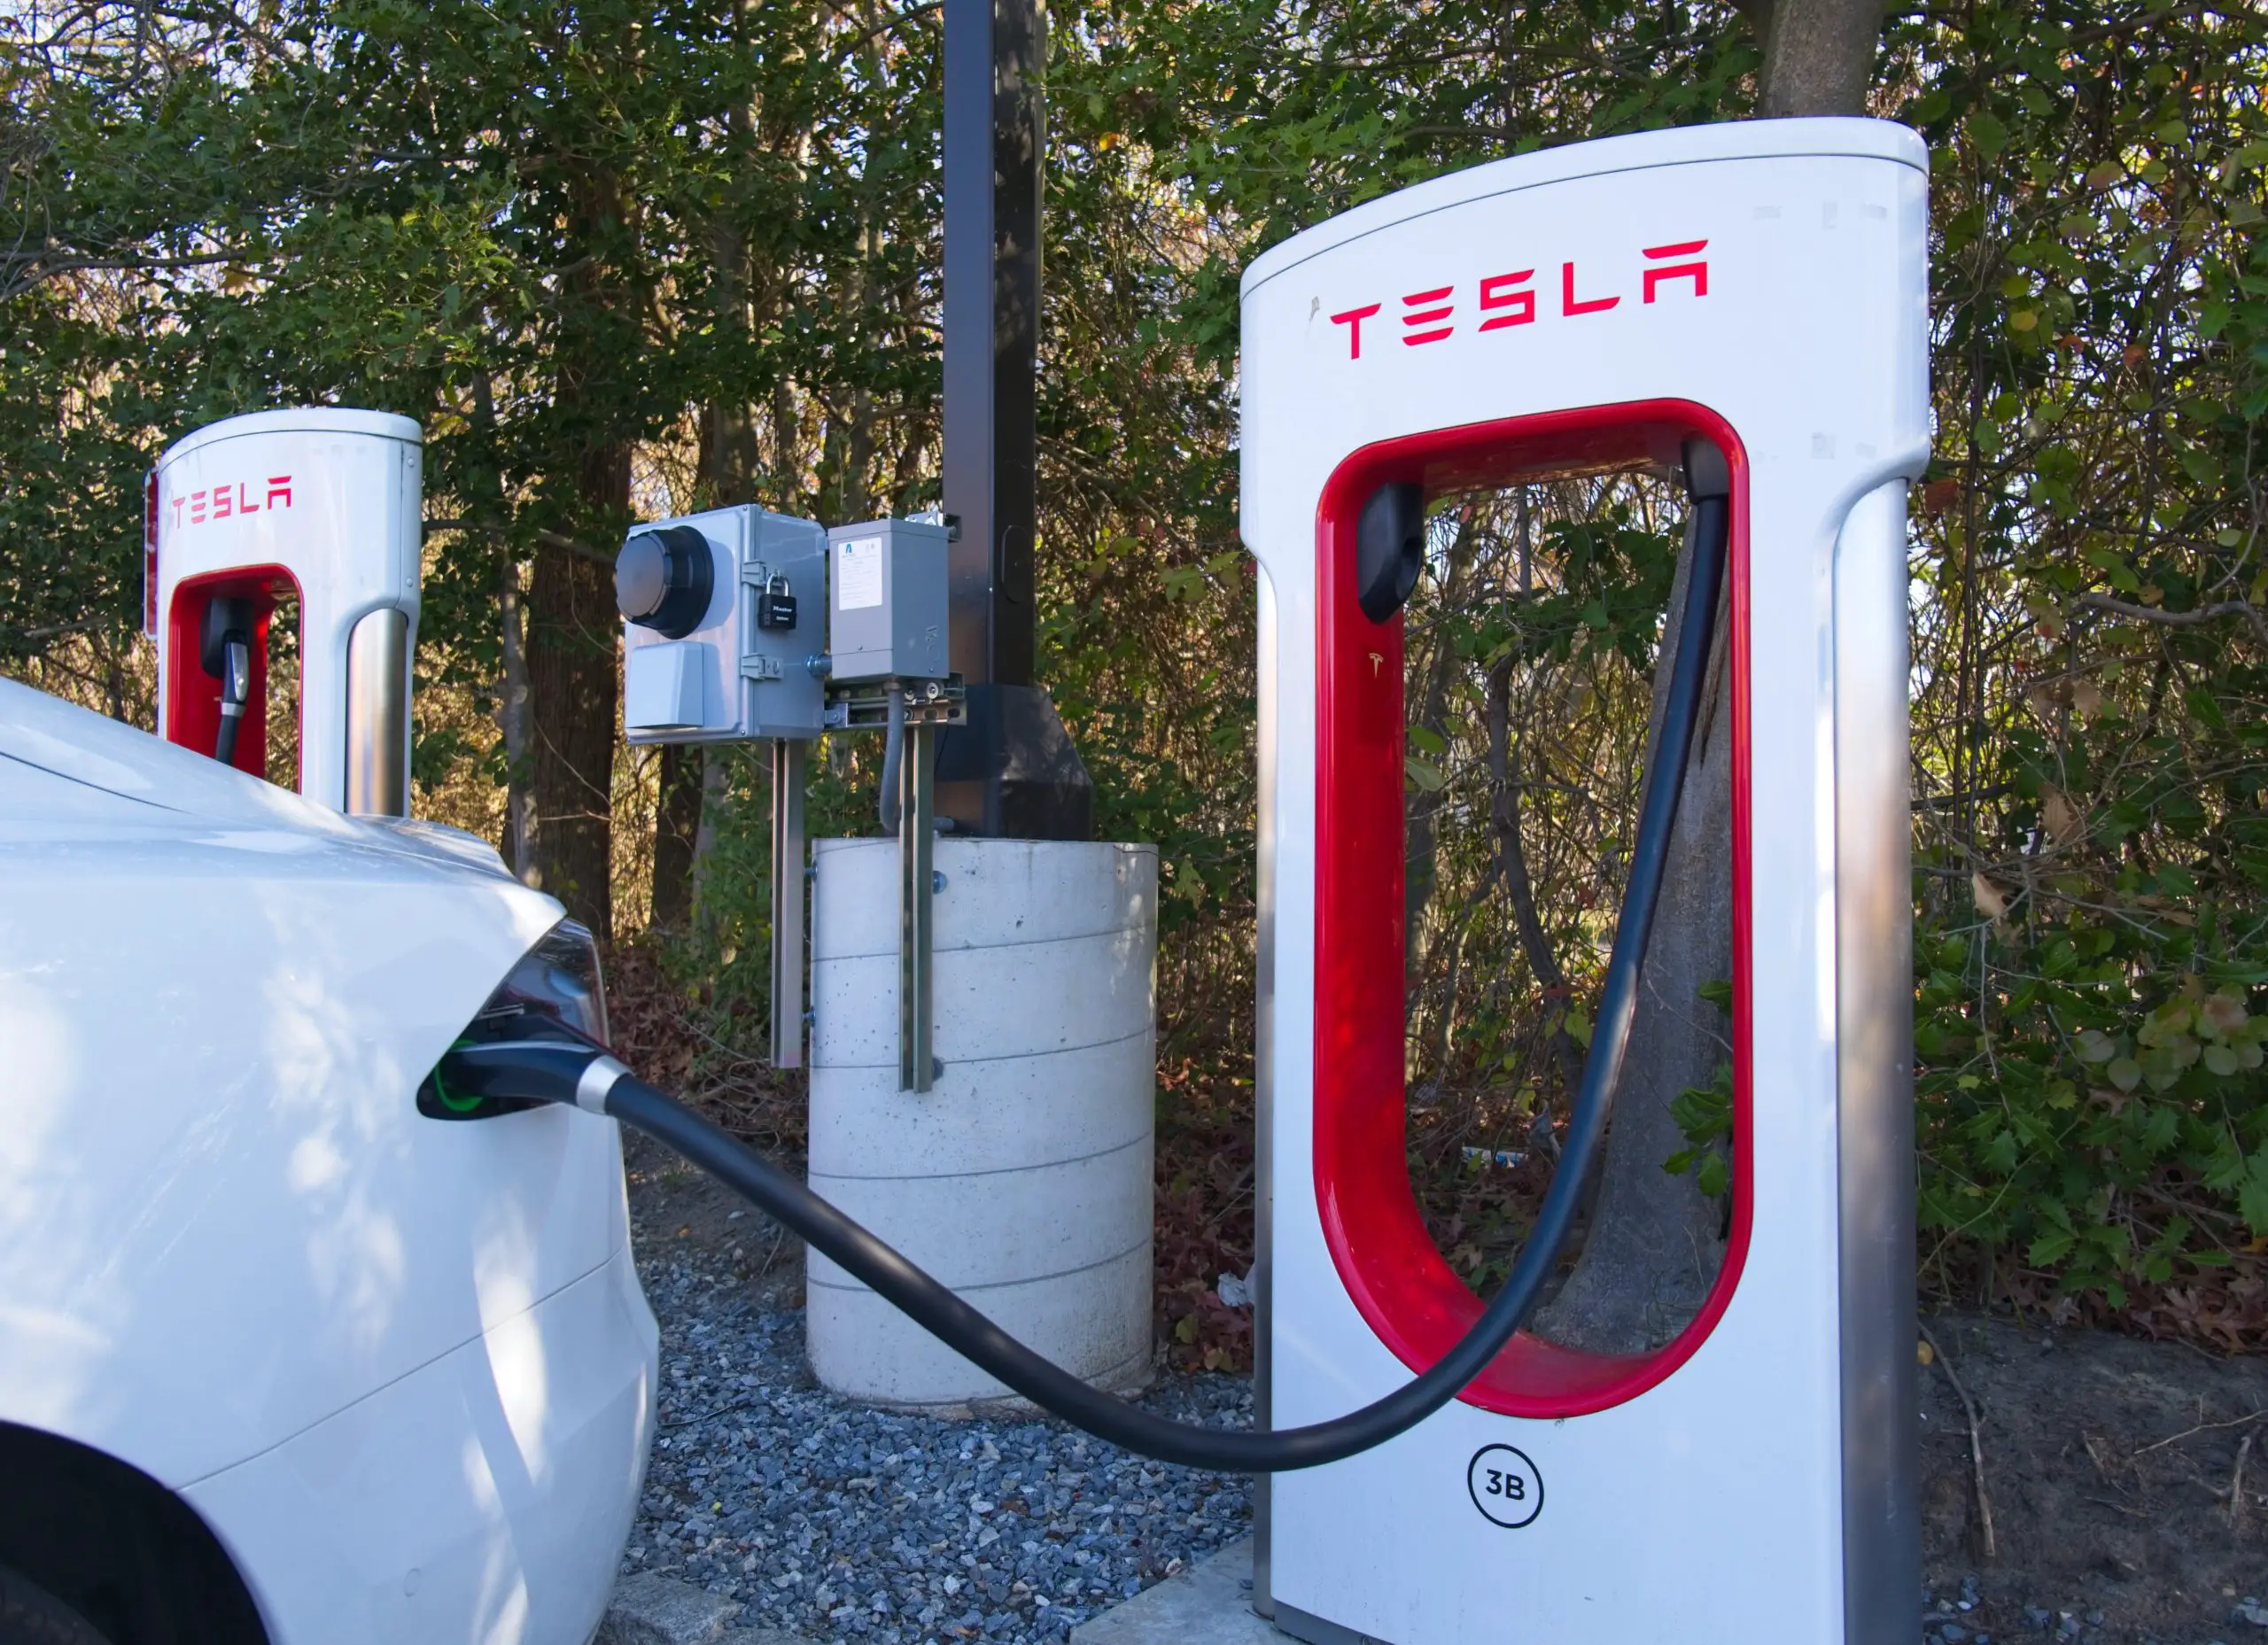 Do Tesla cars charge themselves?